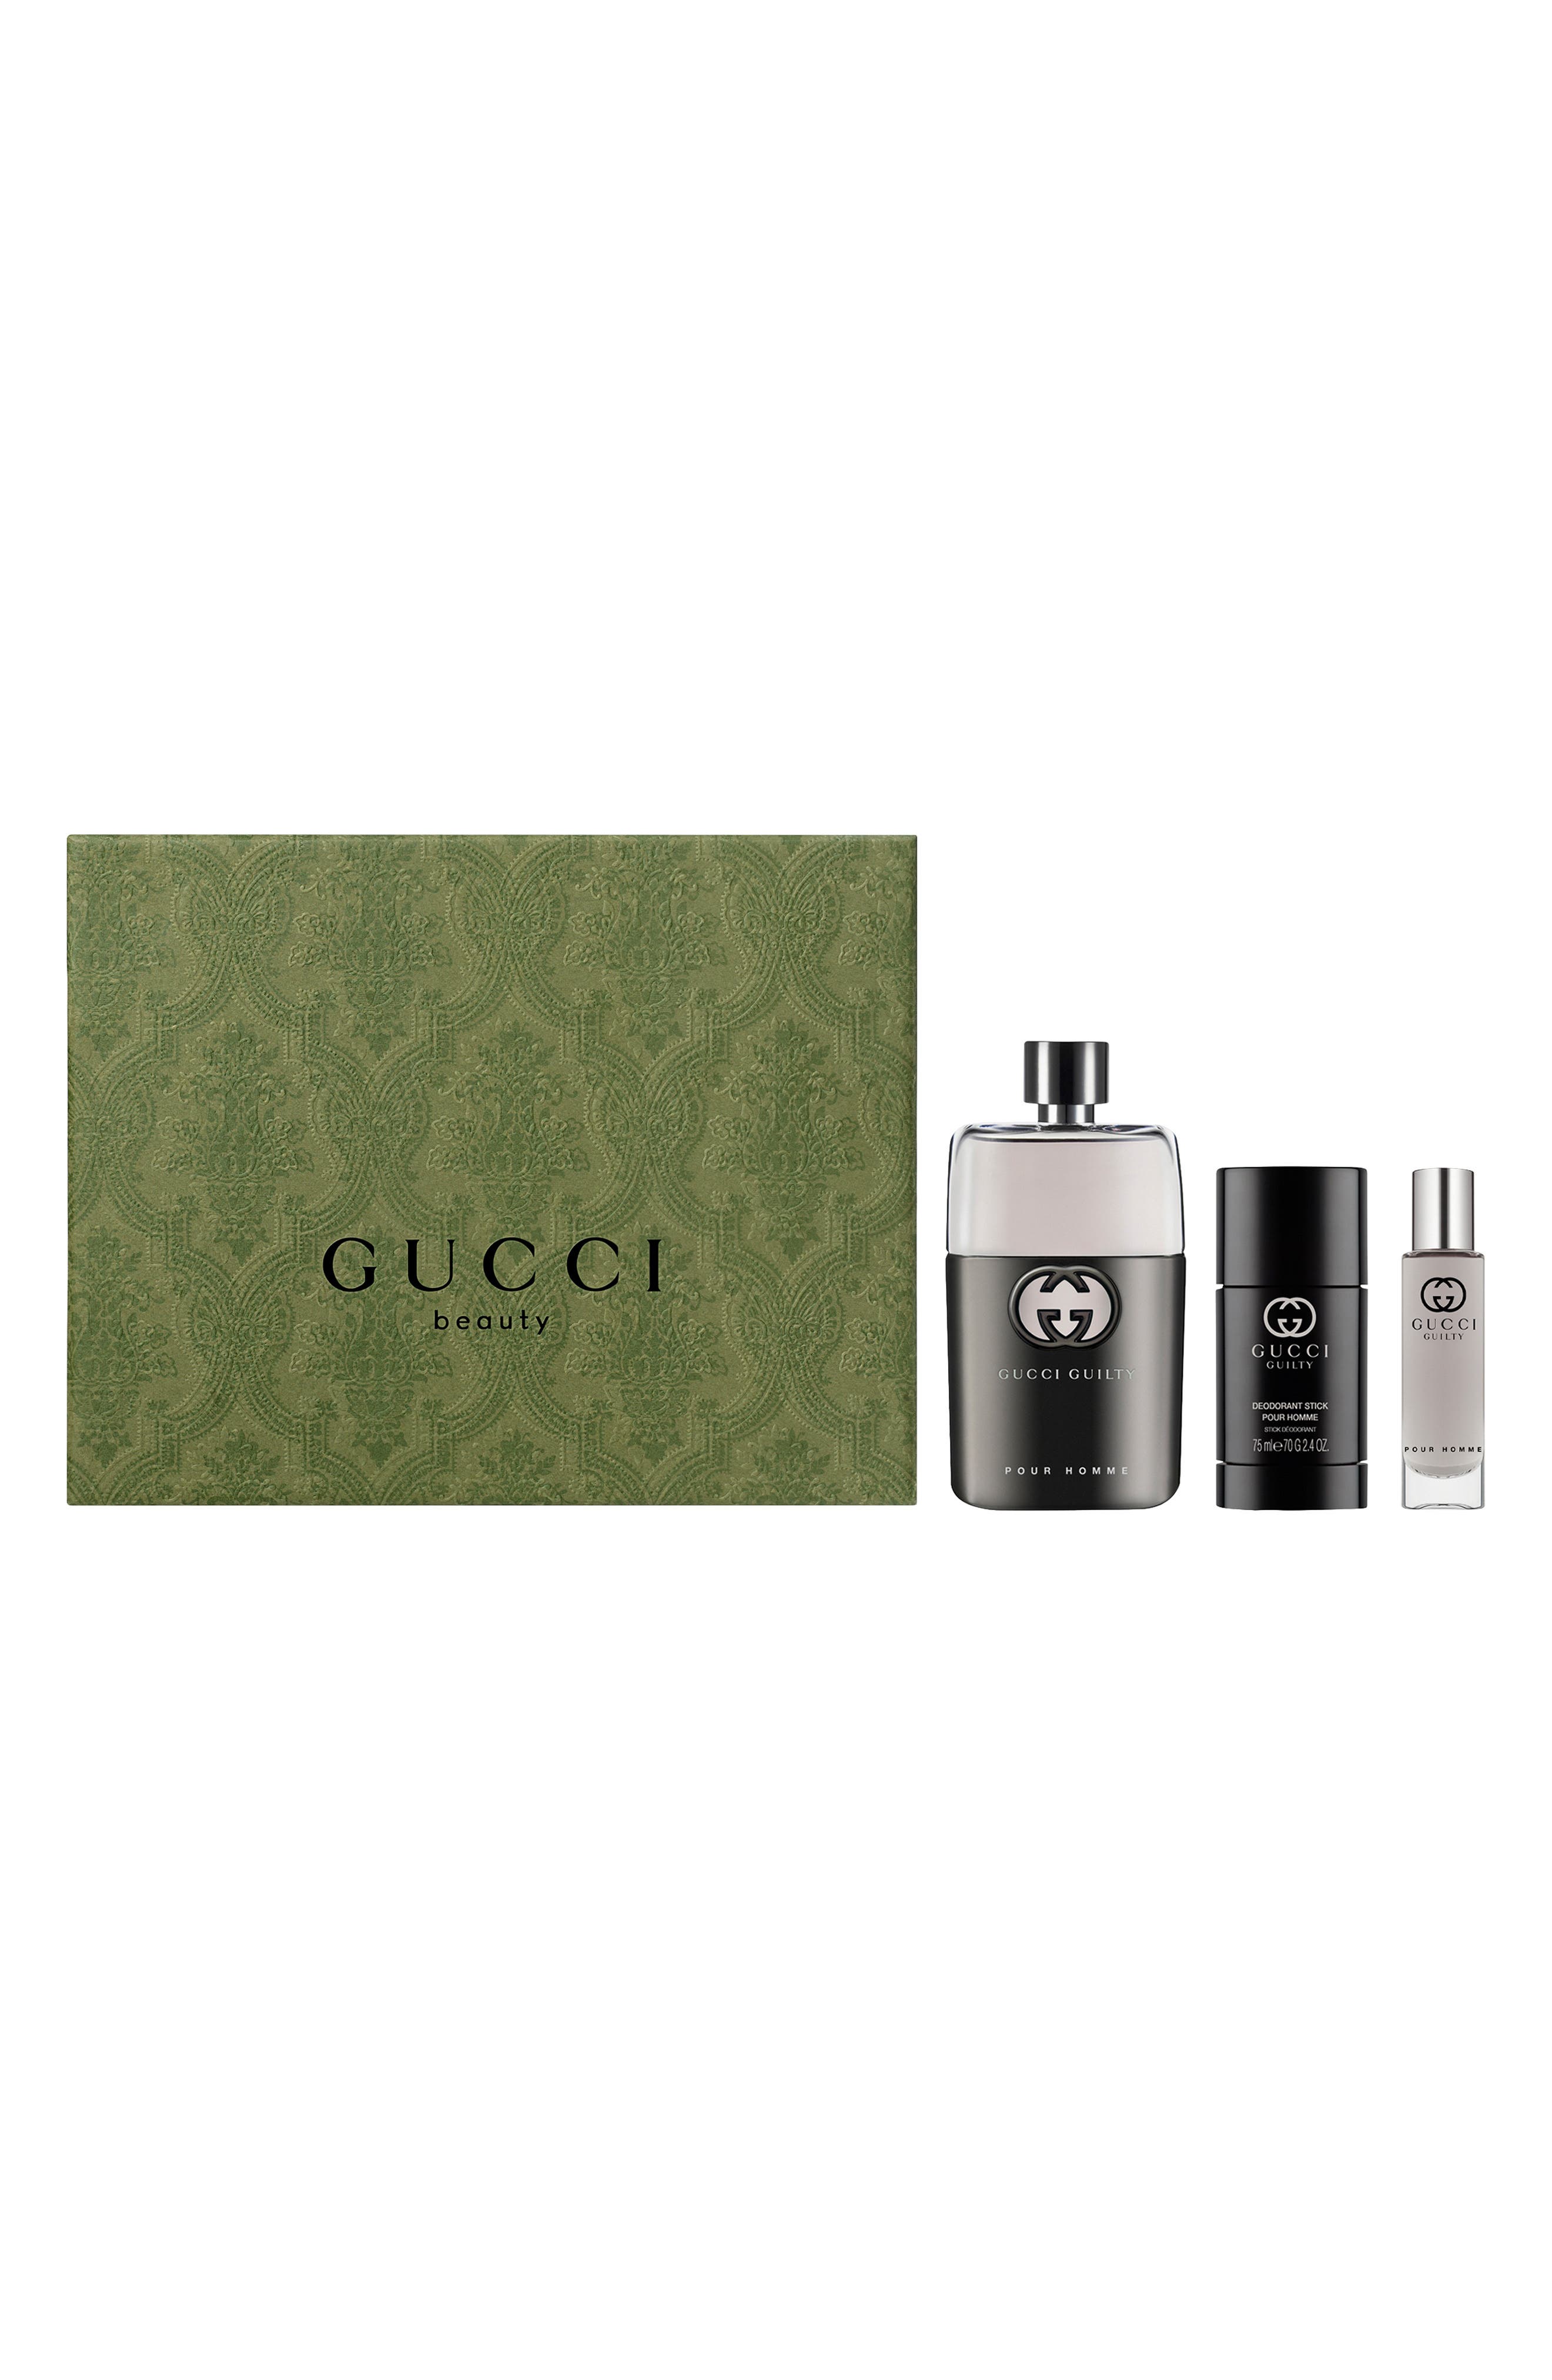 gucci brand products